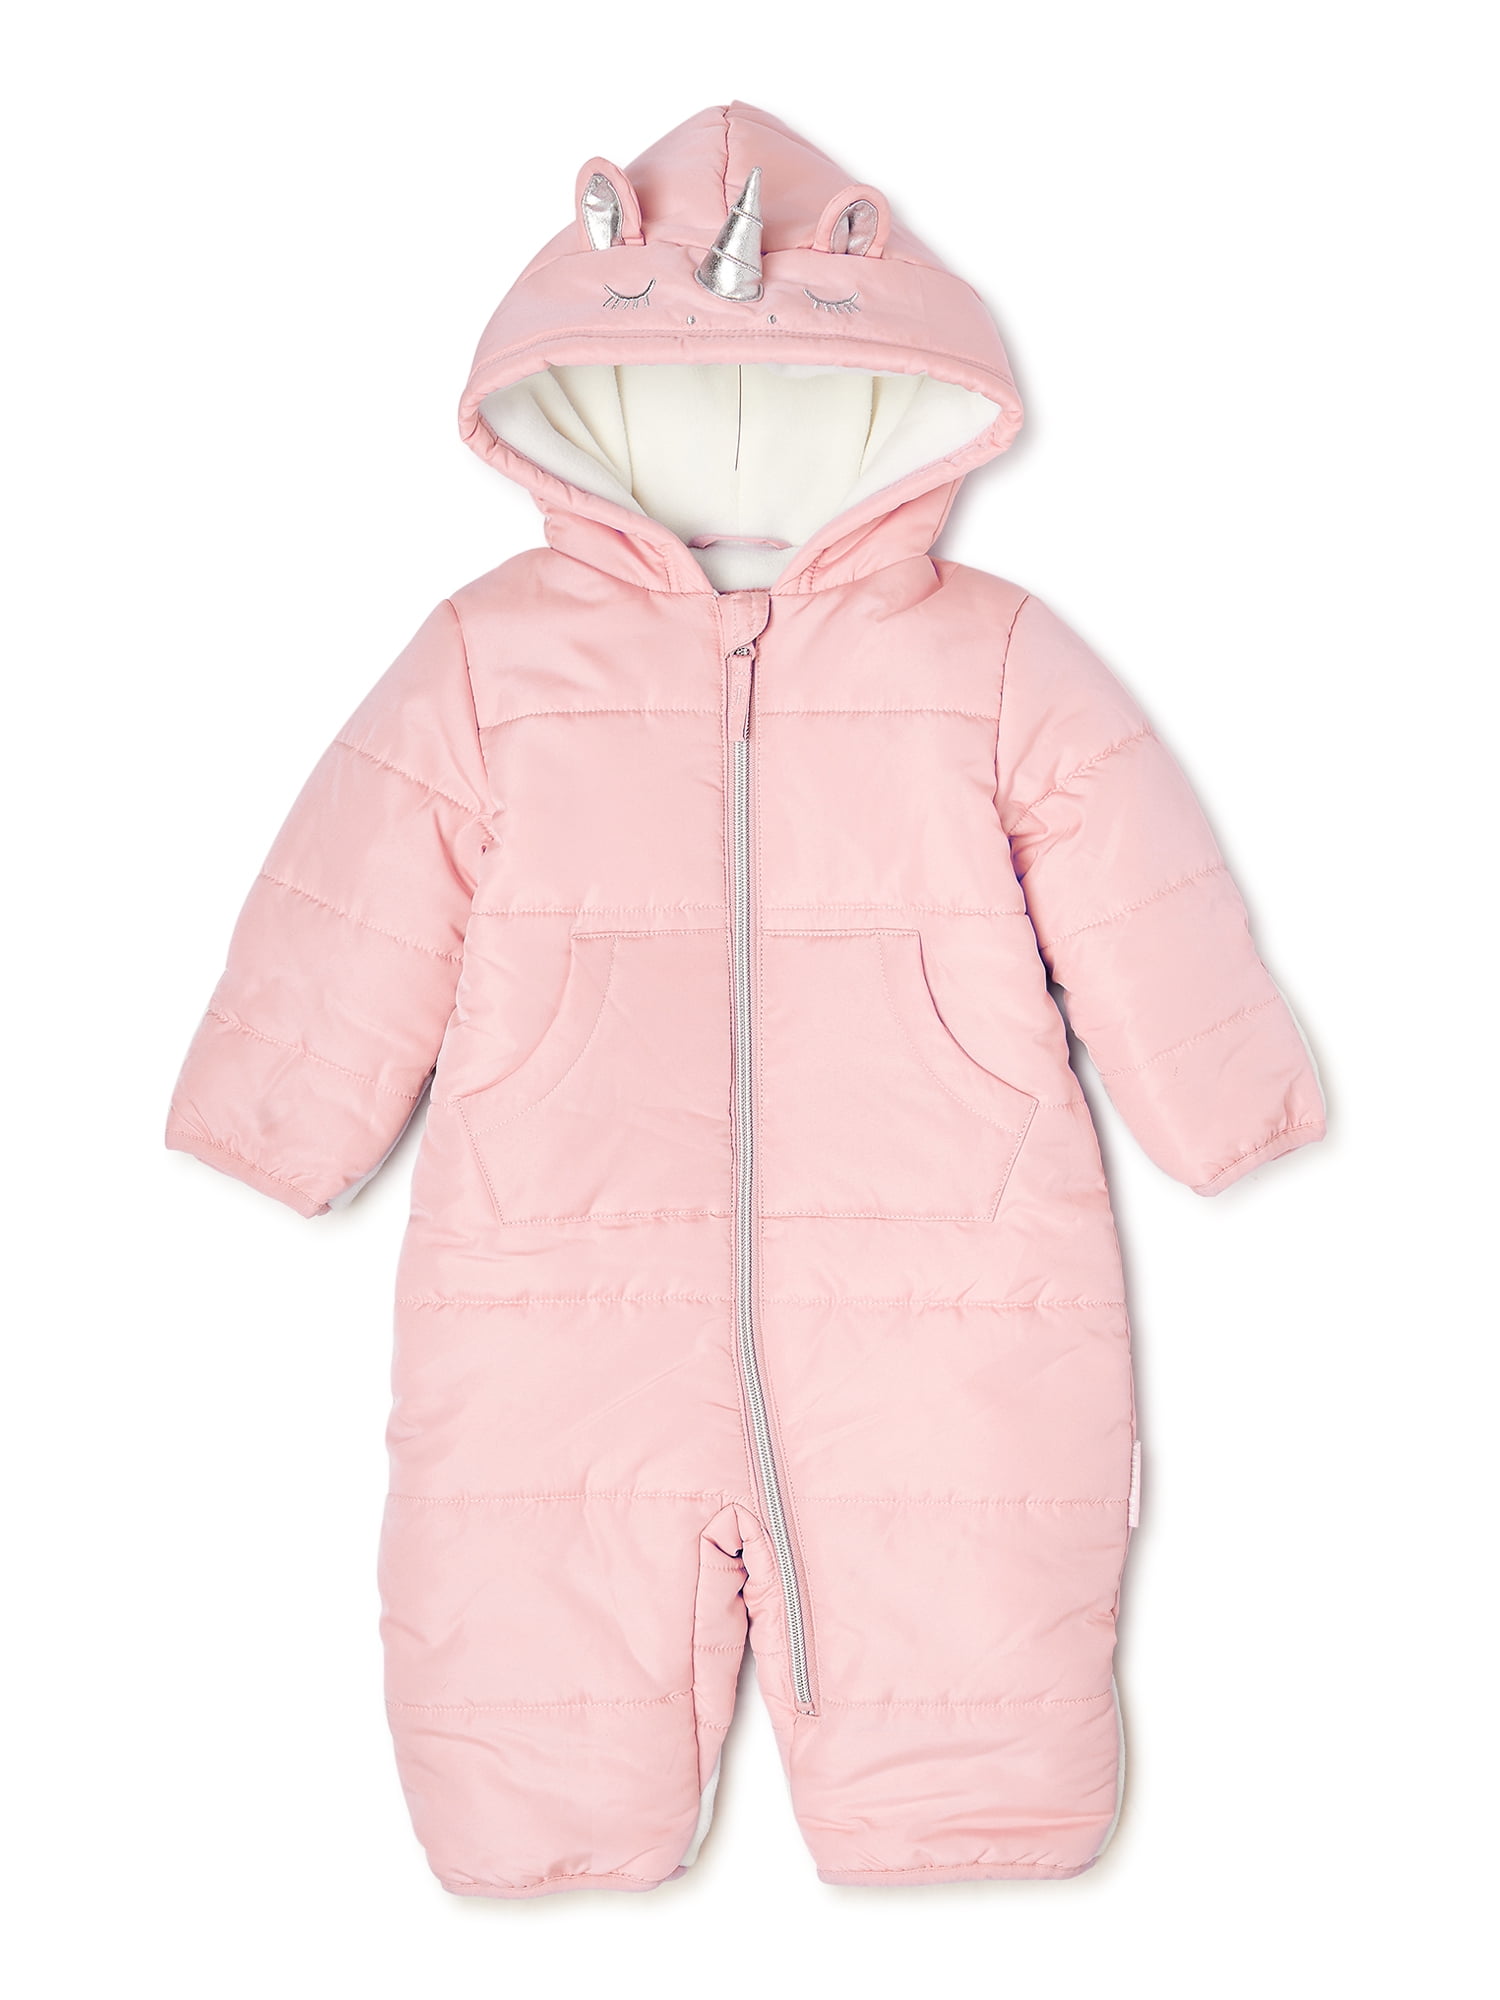 BABY GIRL 2PC SNOWSUIT WITH HOODEMBROIDERY DIAMANTE PINK & ORANGE  6-24 MTHS 